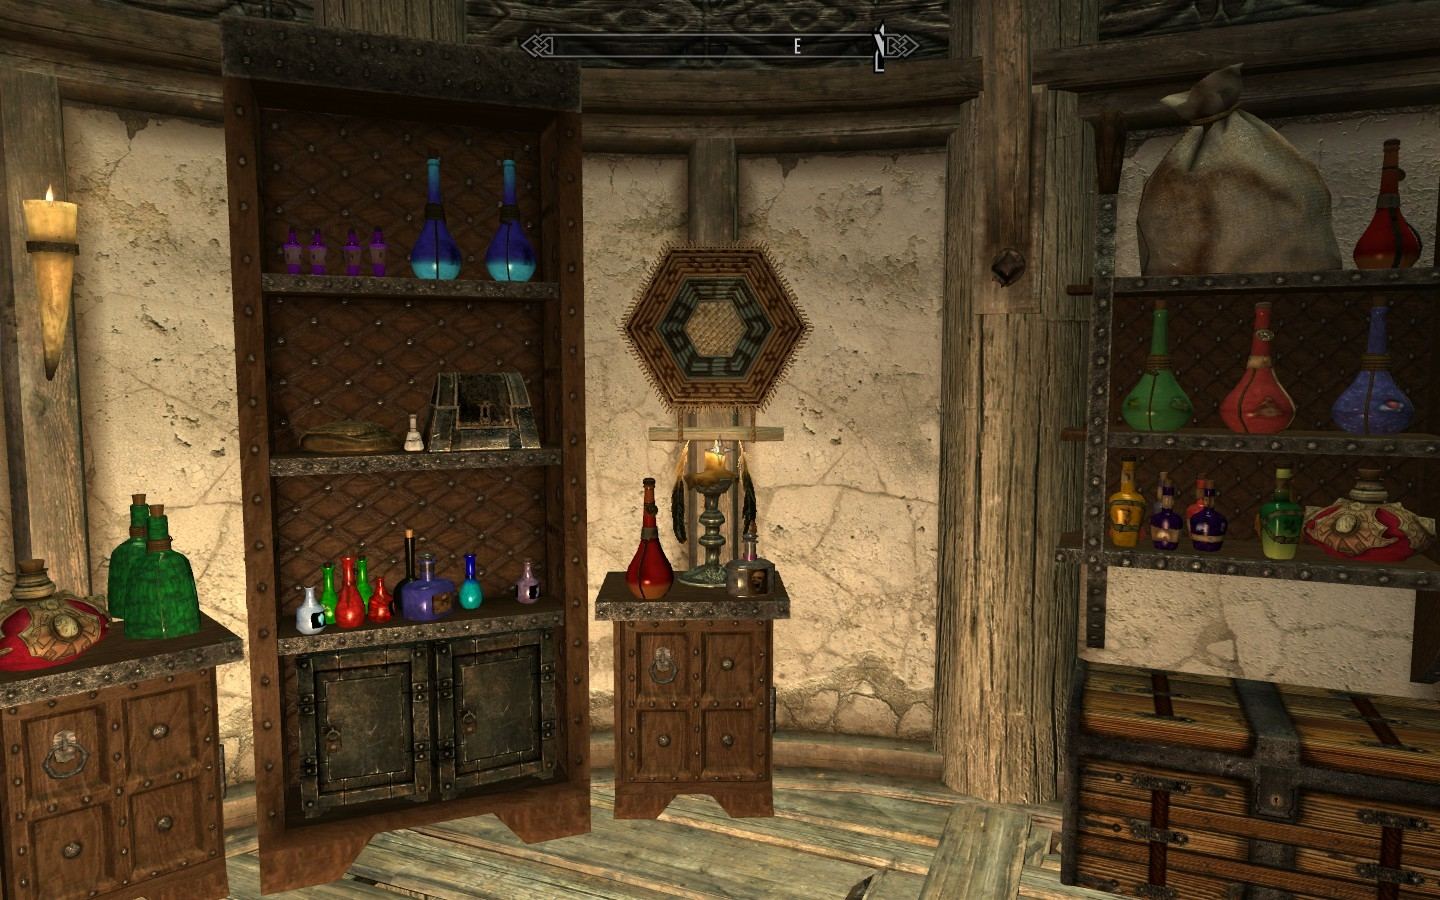 The open rafters and the rustic wood look would be great for a Germanic or  Skyrim themed room